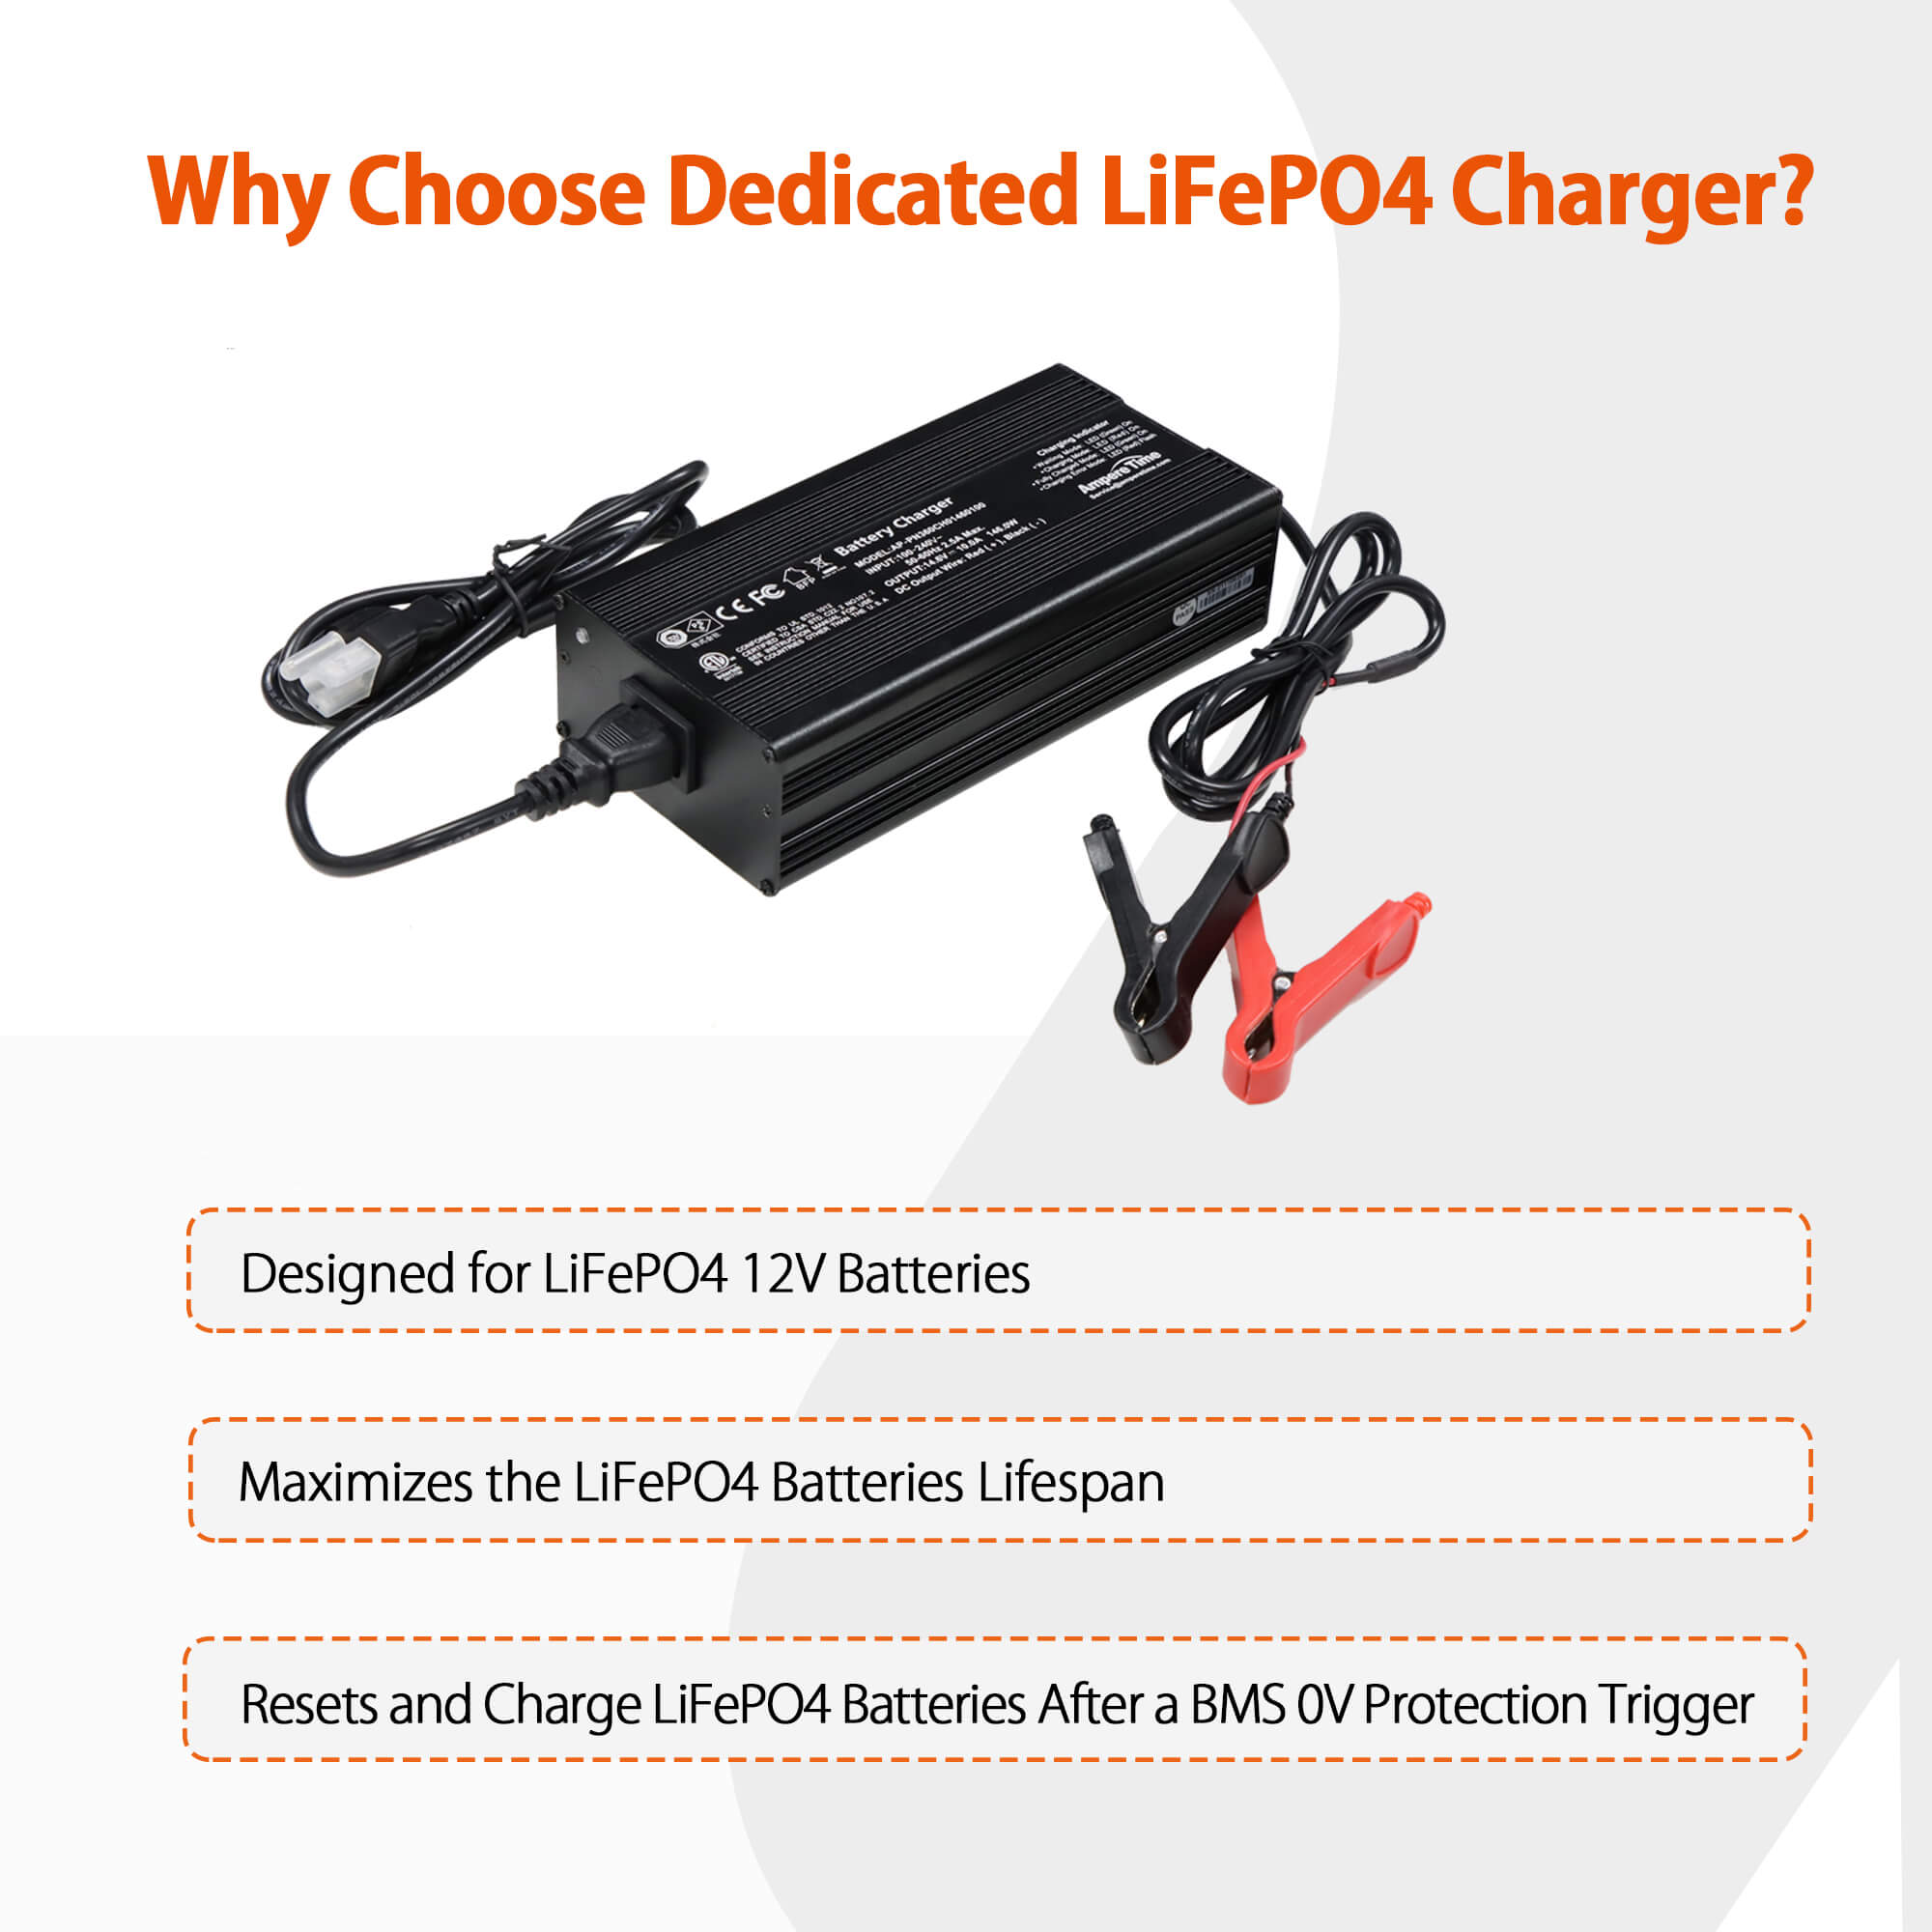 Ampere Time 14.6V 10A Dedicated LiFePO4 Battery Charger with Trickle Charging Battery Maintainer, 90% Charging Efficiency